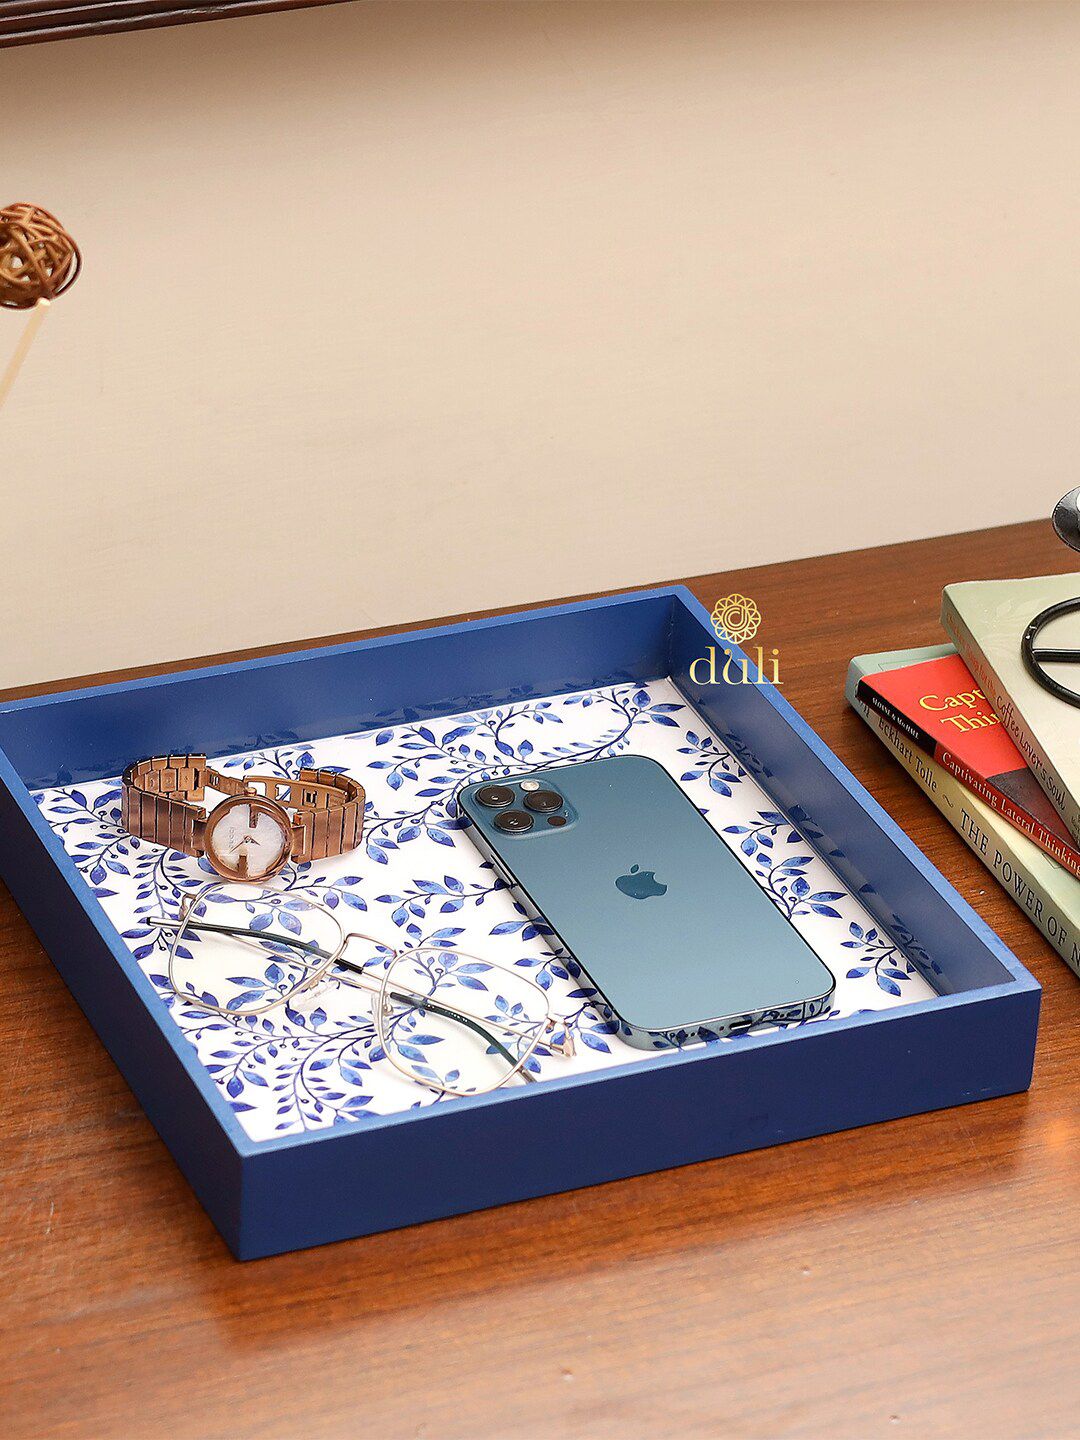 DULI Blue & White Floral Printed Tray Price in India